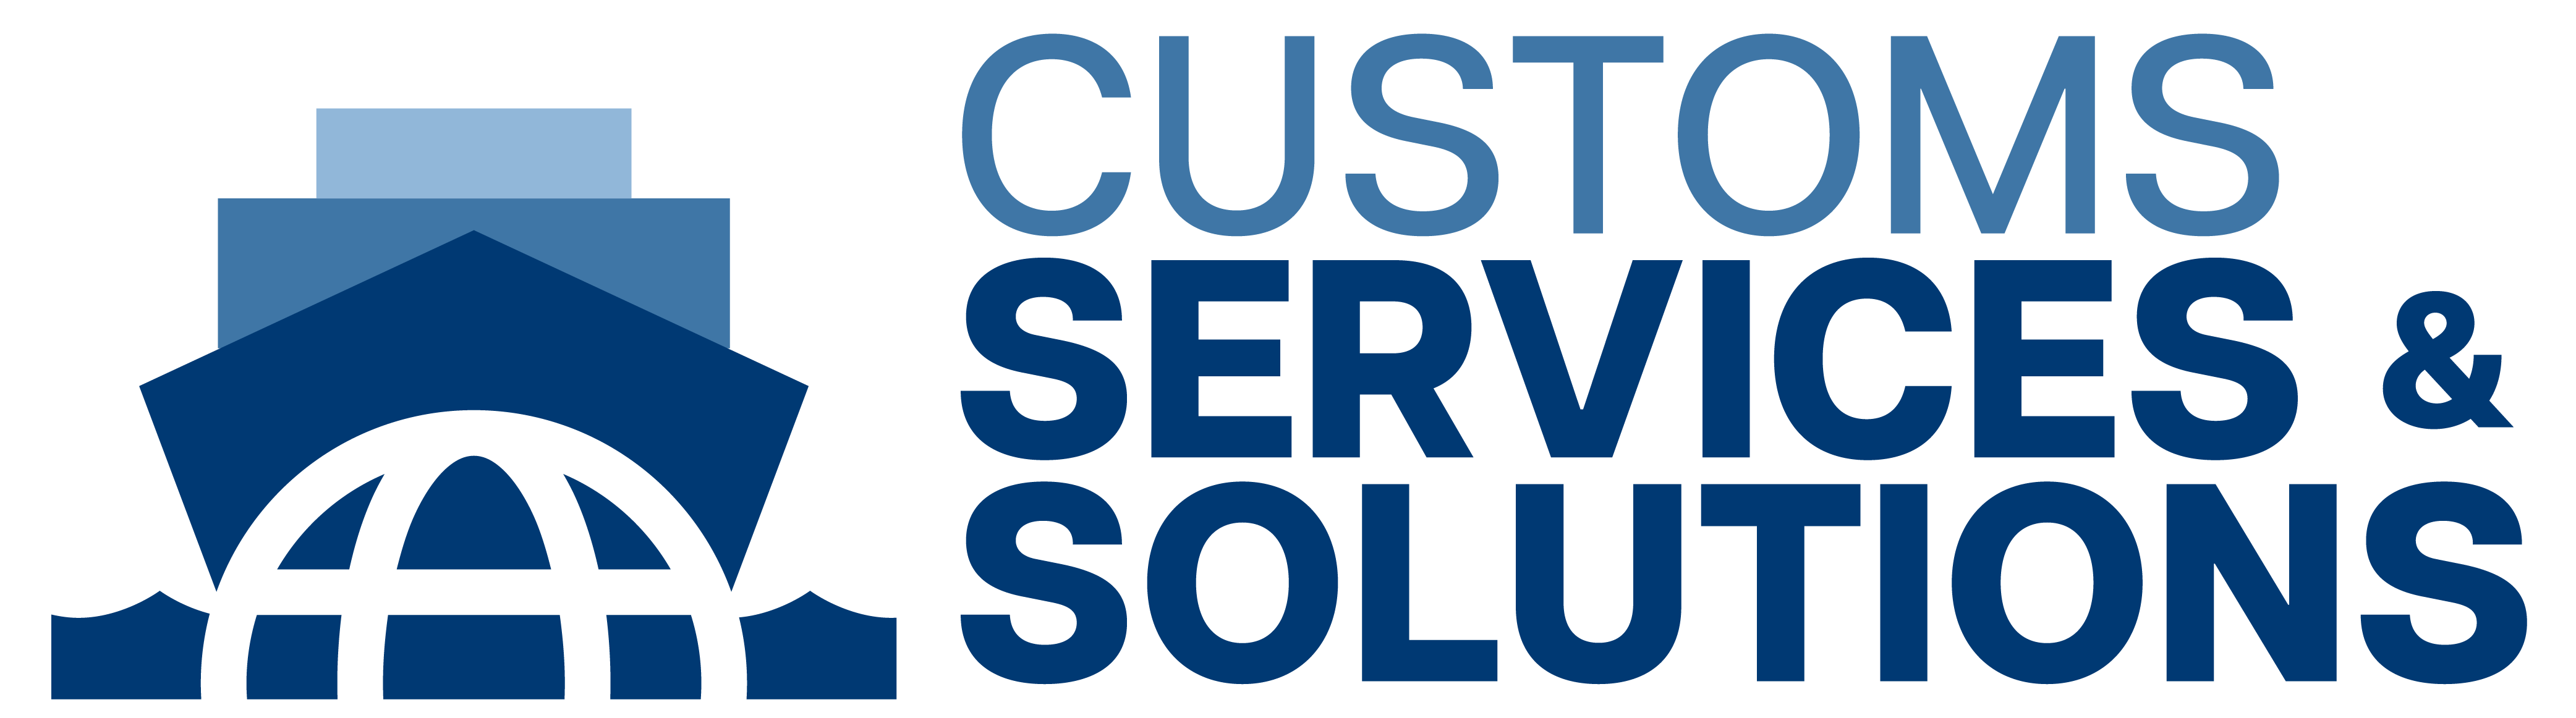 Customs Services & Solutions